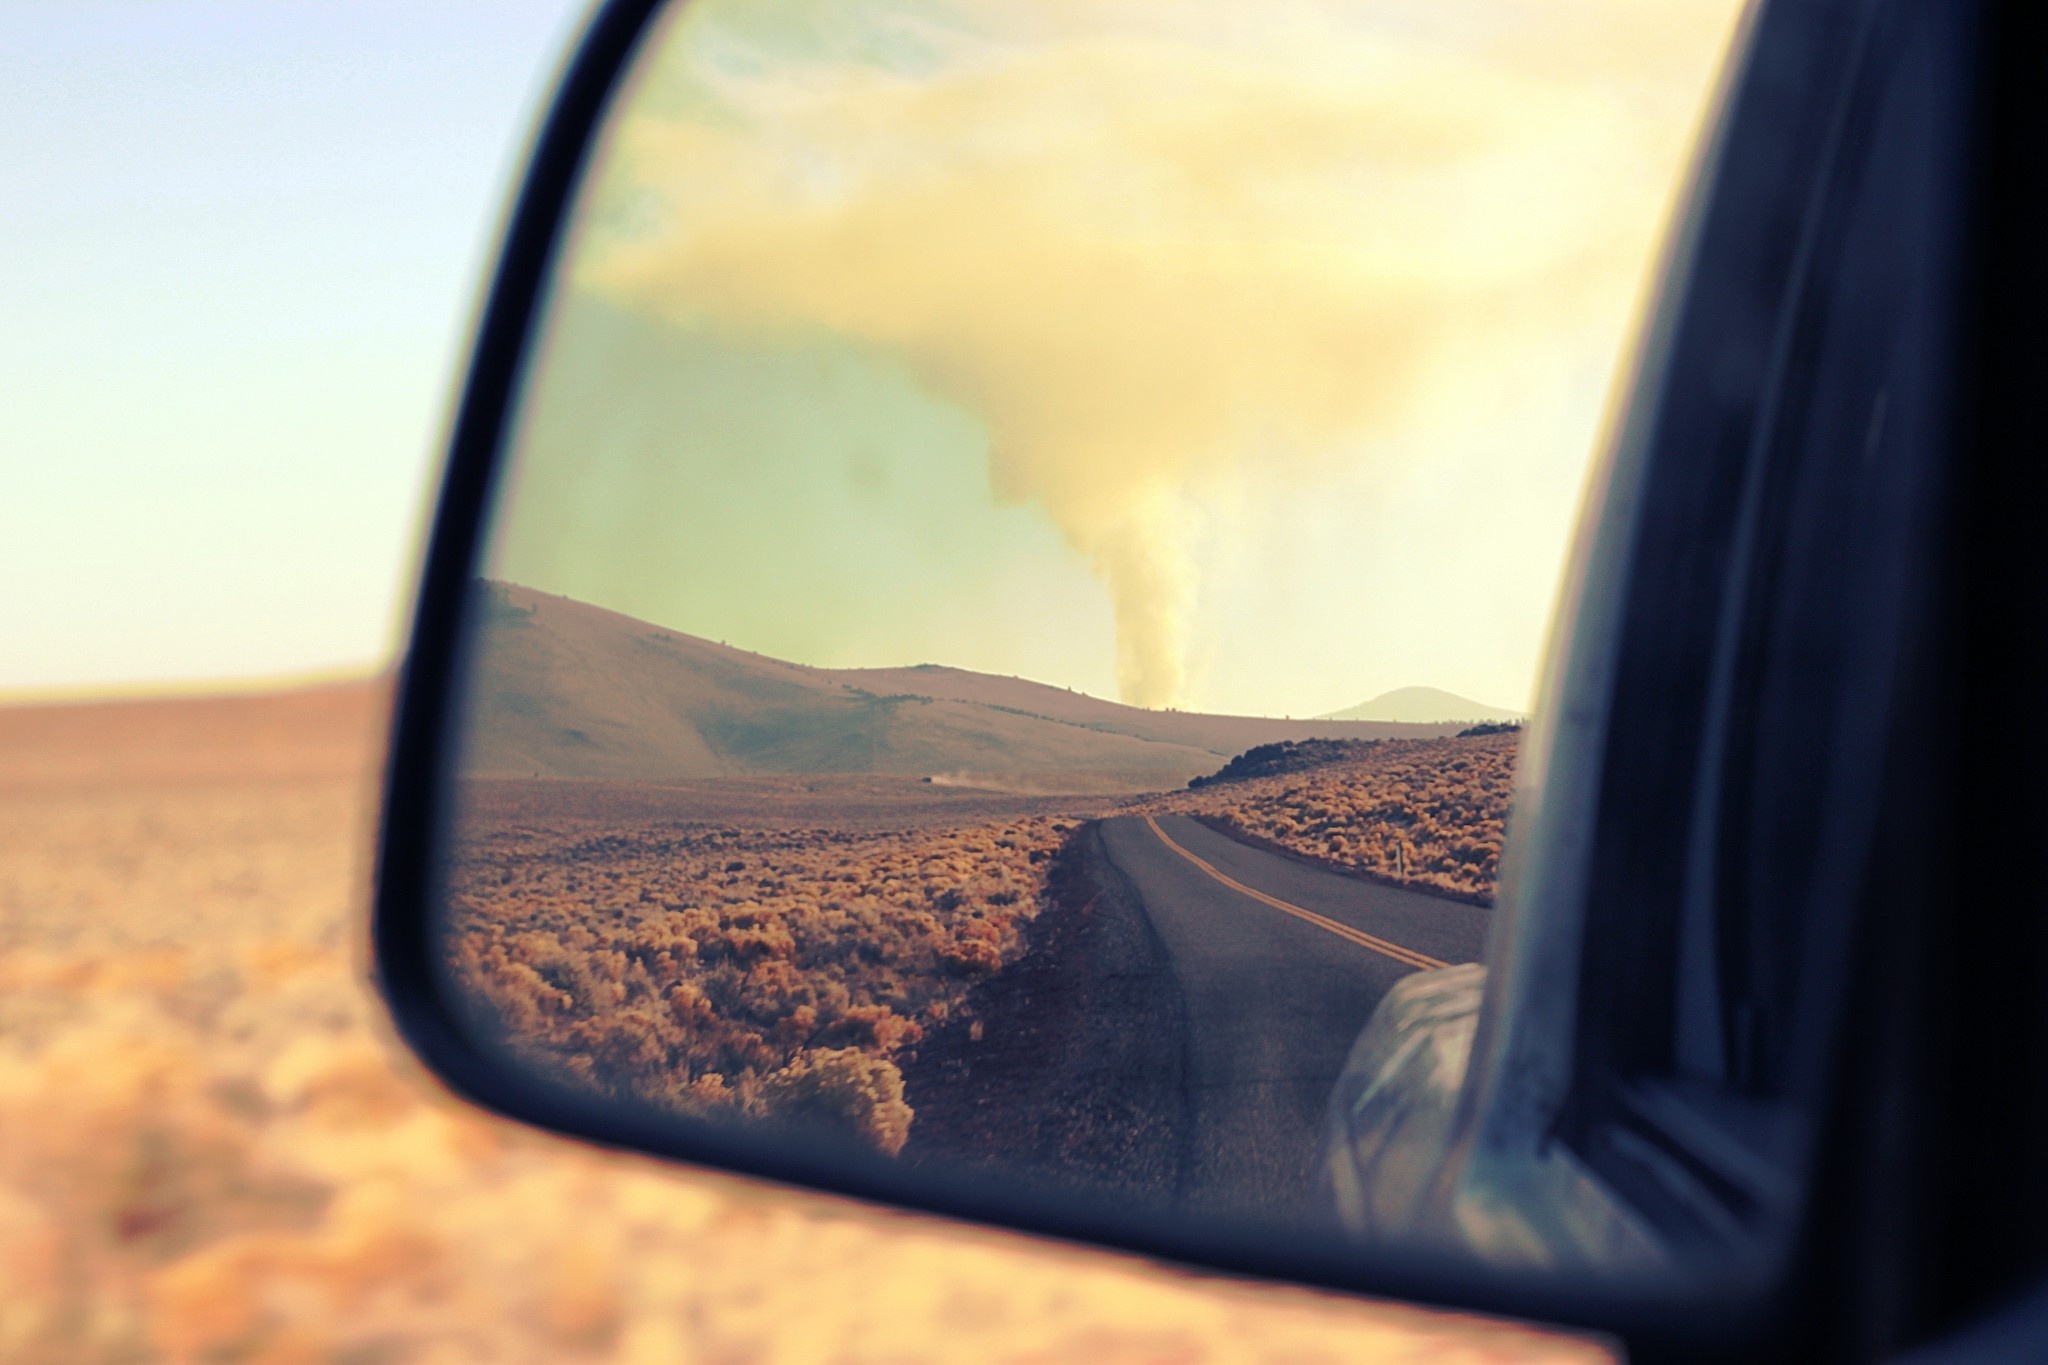 Landscape nature photography, Rearview mirror, Road scenery, Tranquil views, 2050x1370 HD Desktop